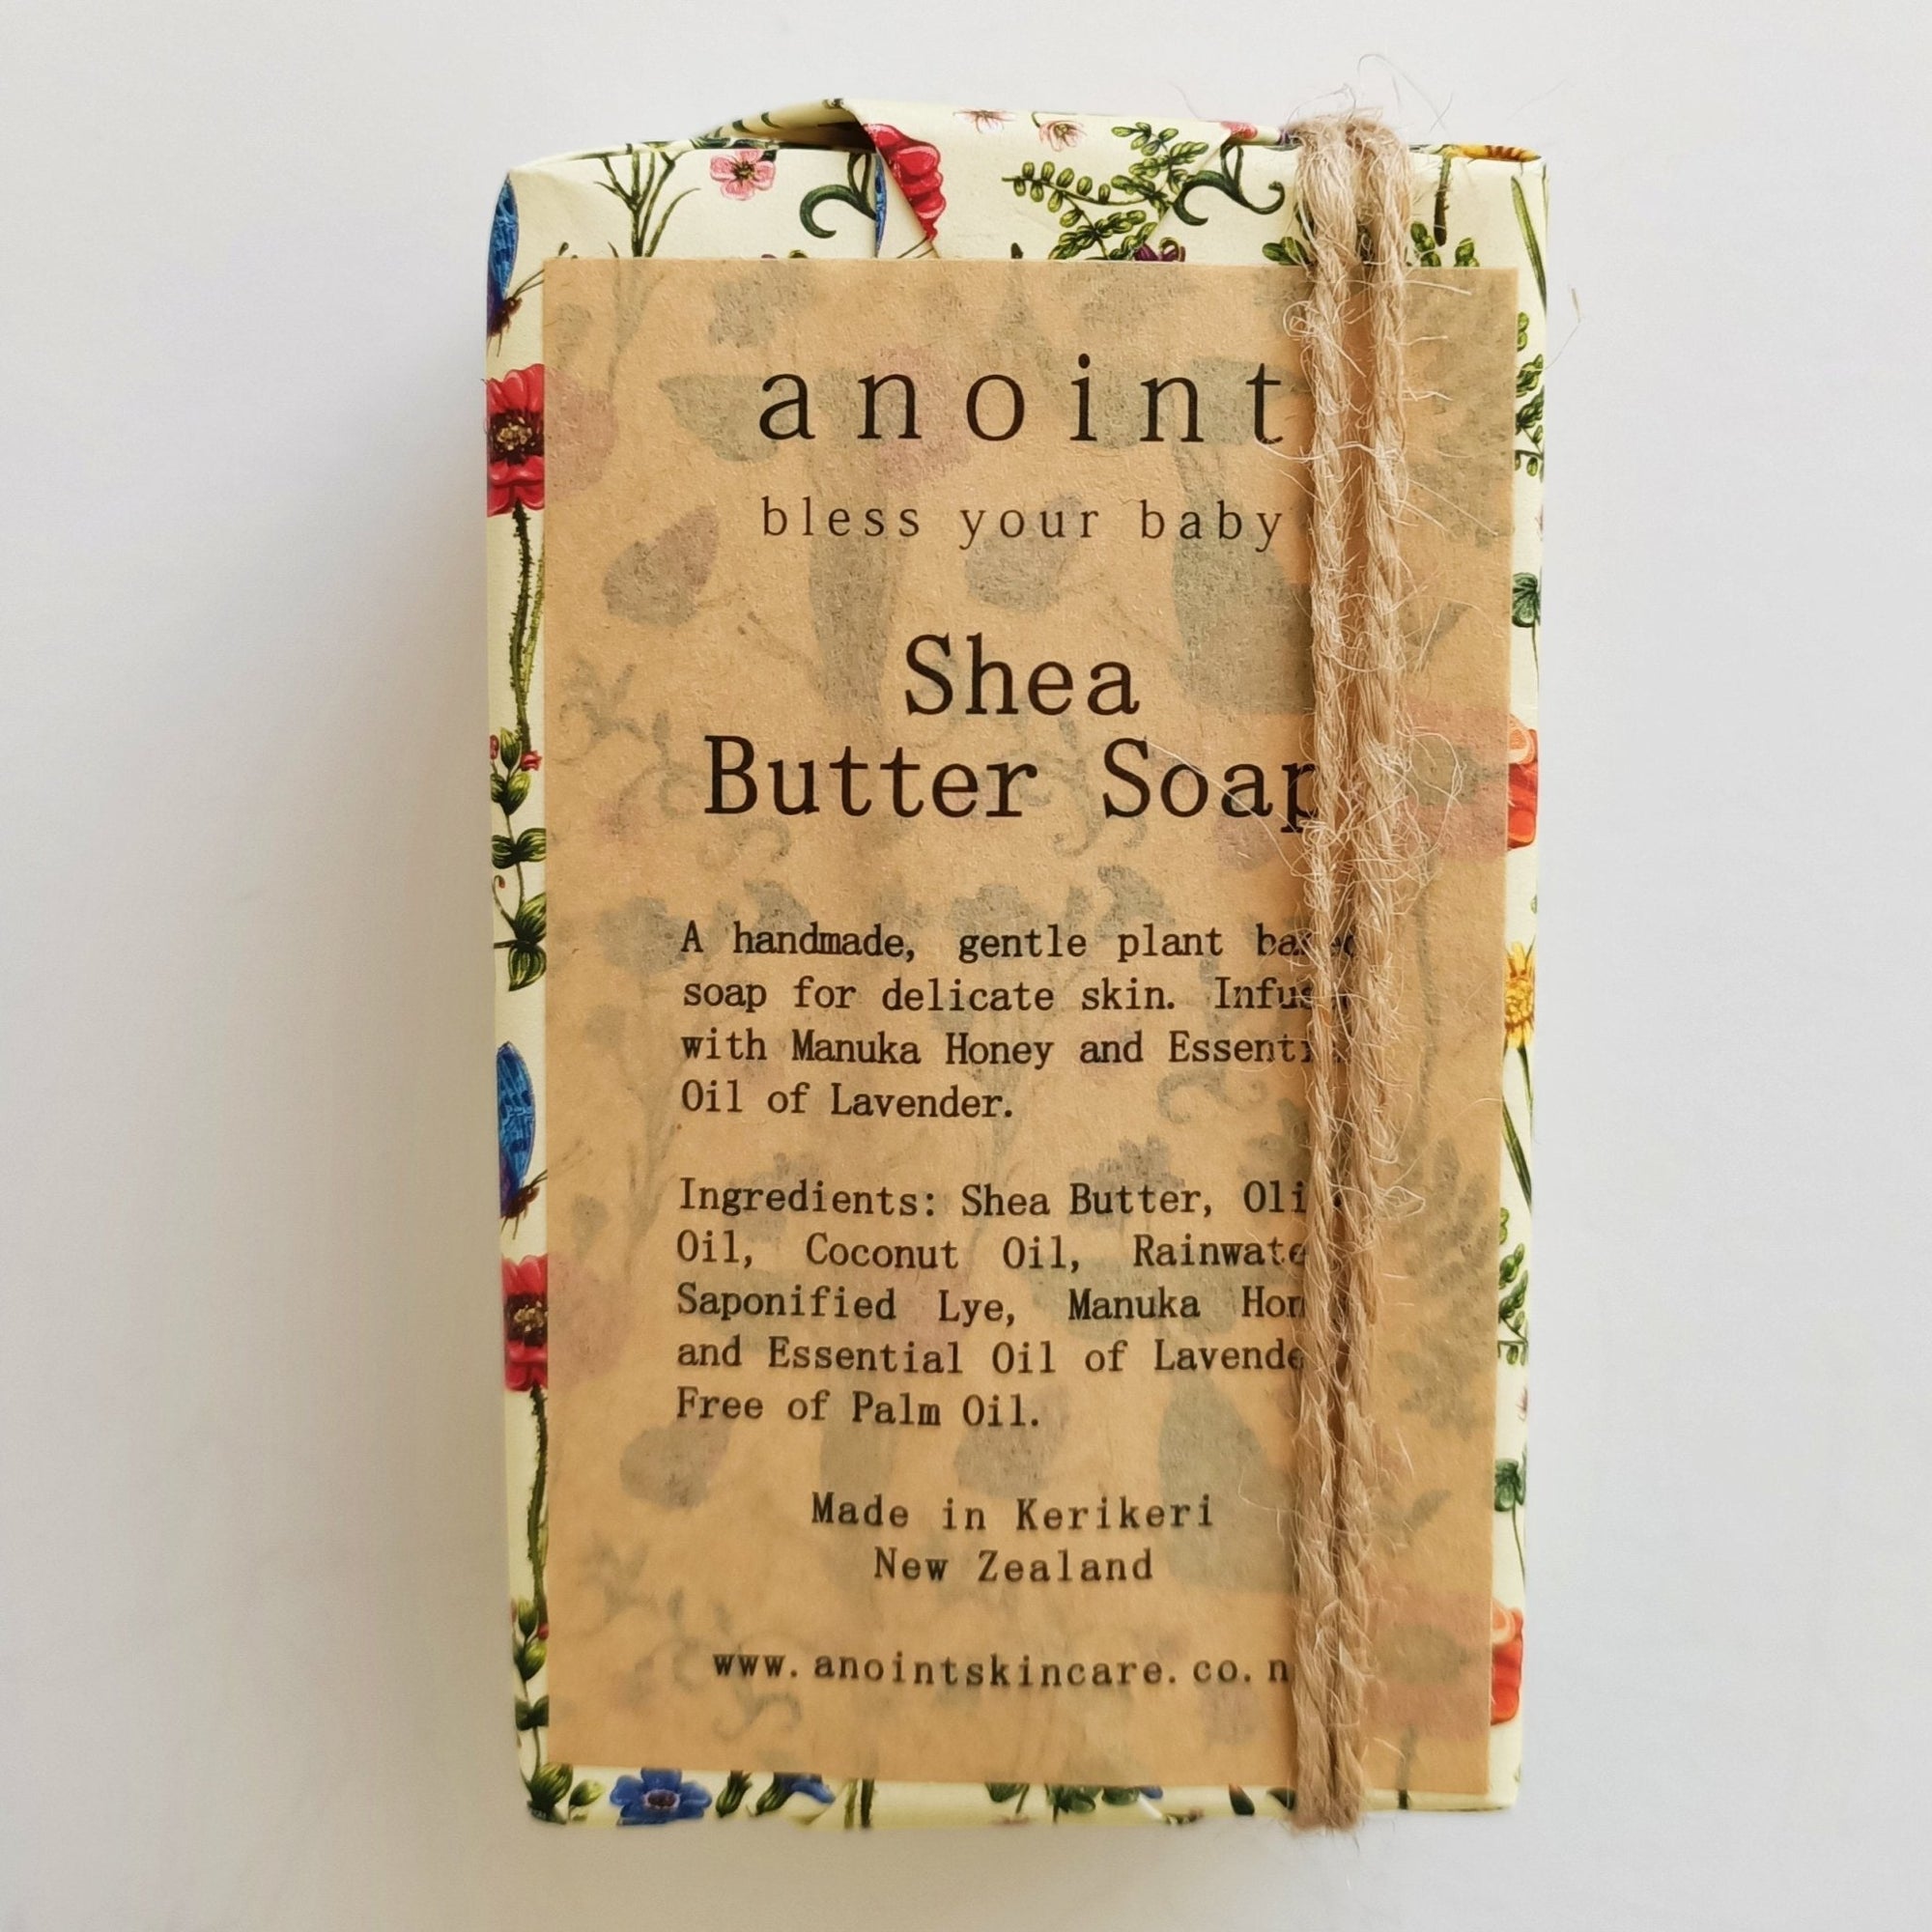 Anoint Baby Shea Butter Soap - Beautiful Gifts - Packaged with Love